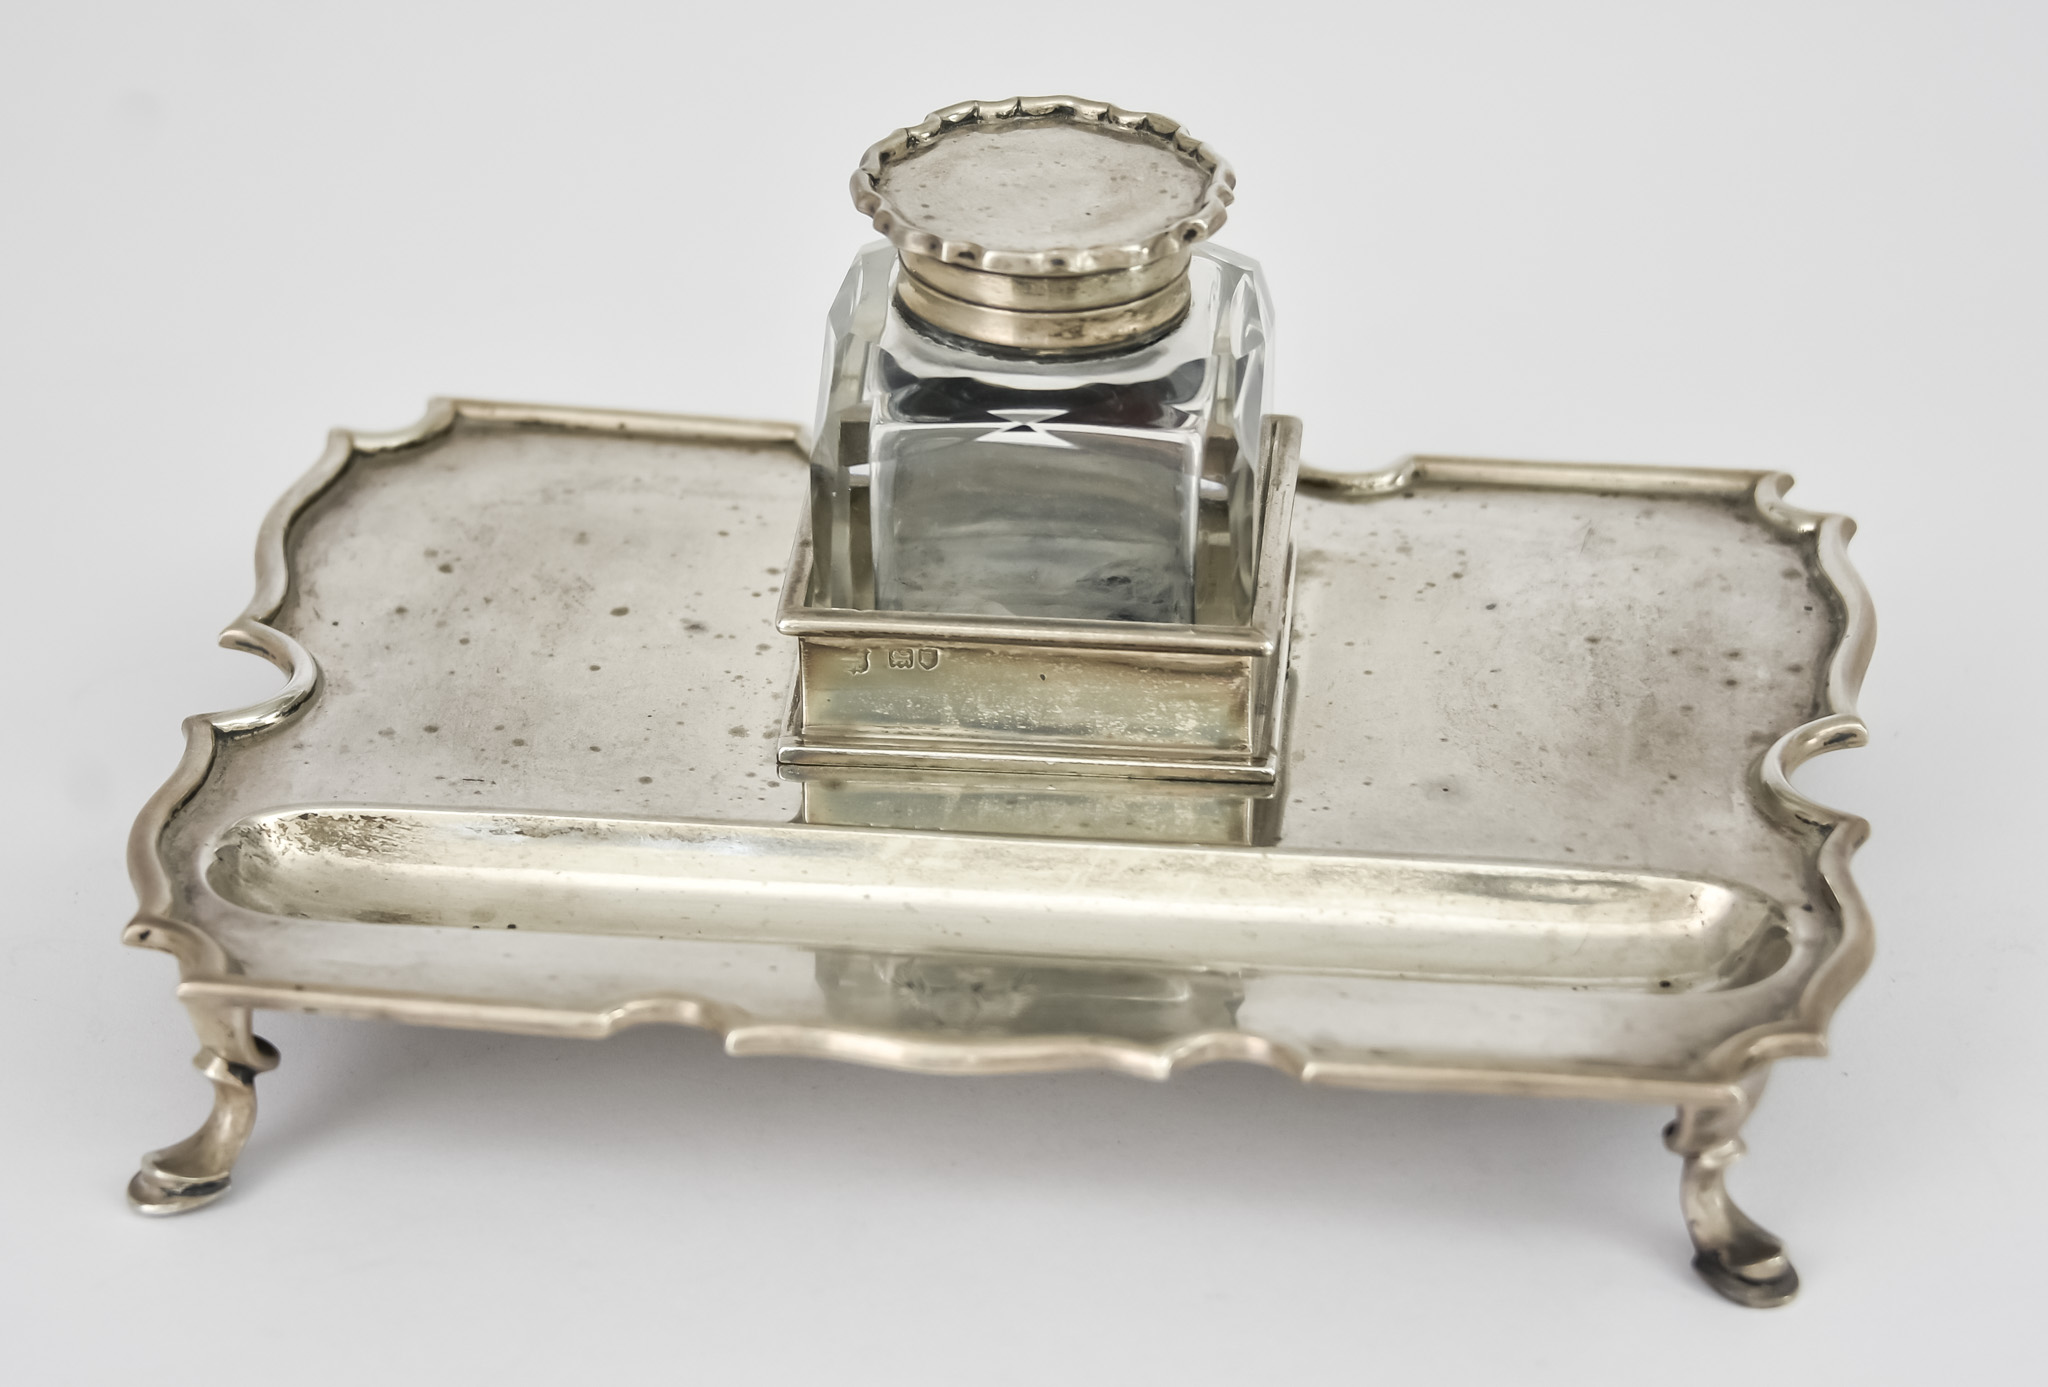 A Late Victorian Silver Rectangular Ink Stand, by Goldsmiths & Silversmiths Co. London 1899, of